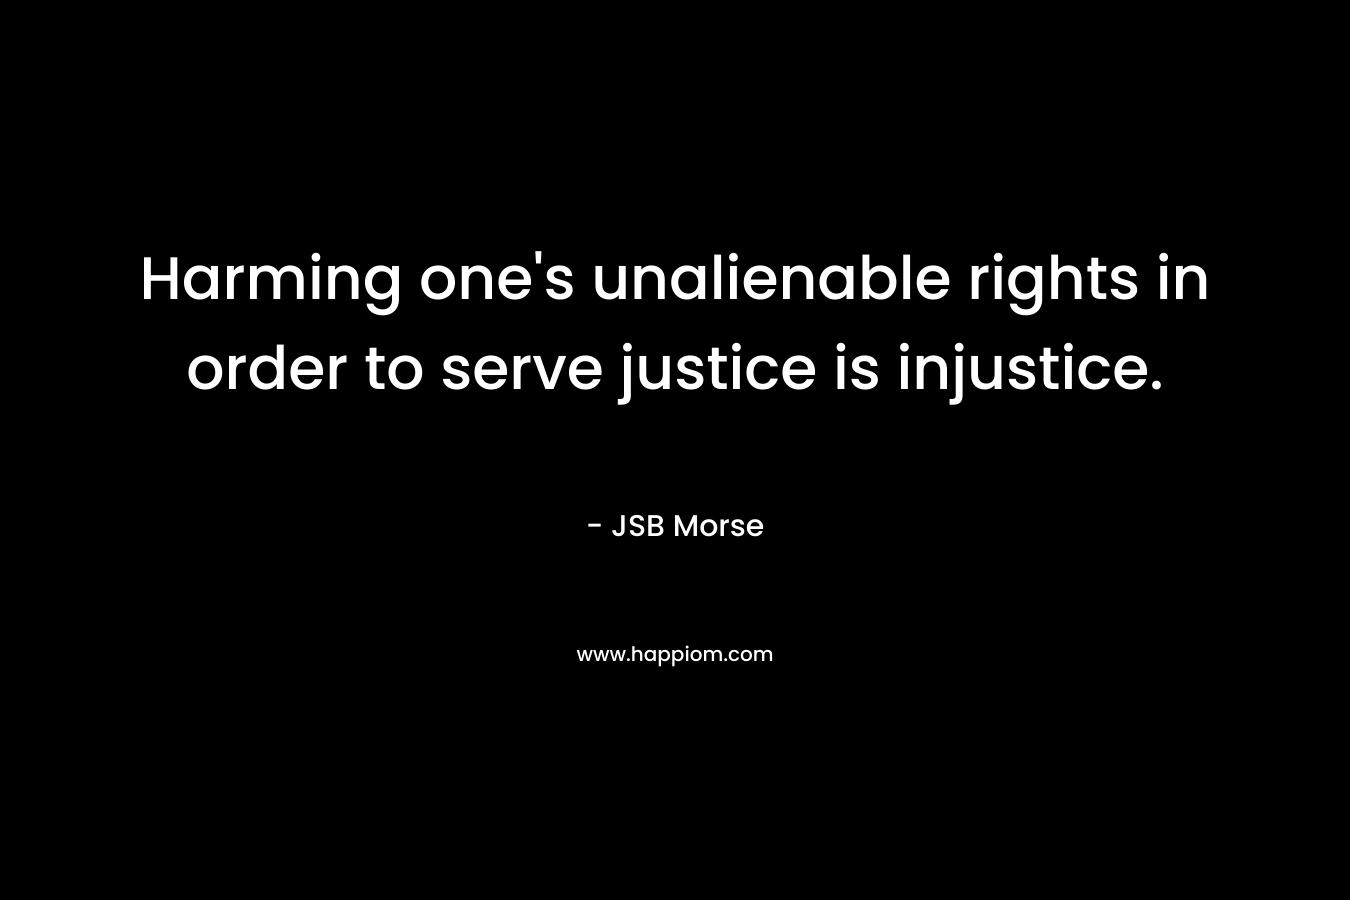 Harming one's unalienable rights in order to serve justice is injustice.